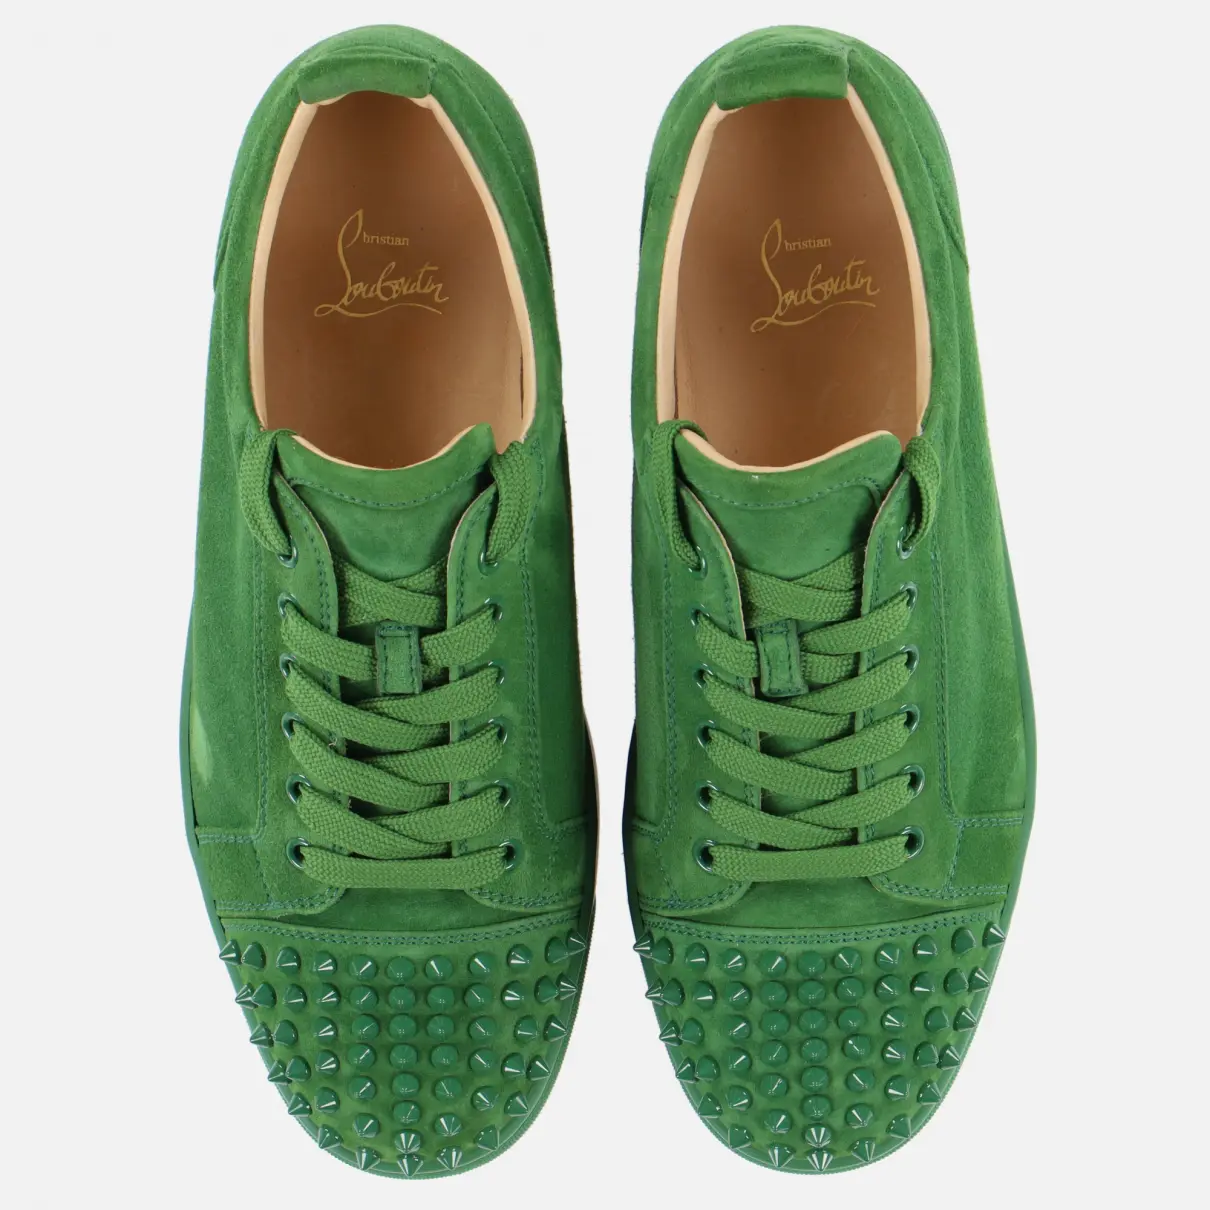 Buy Christian Louboutin Low trainers online